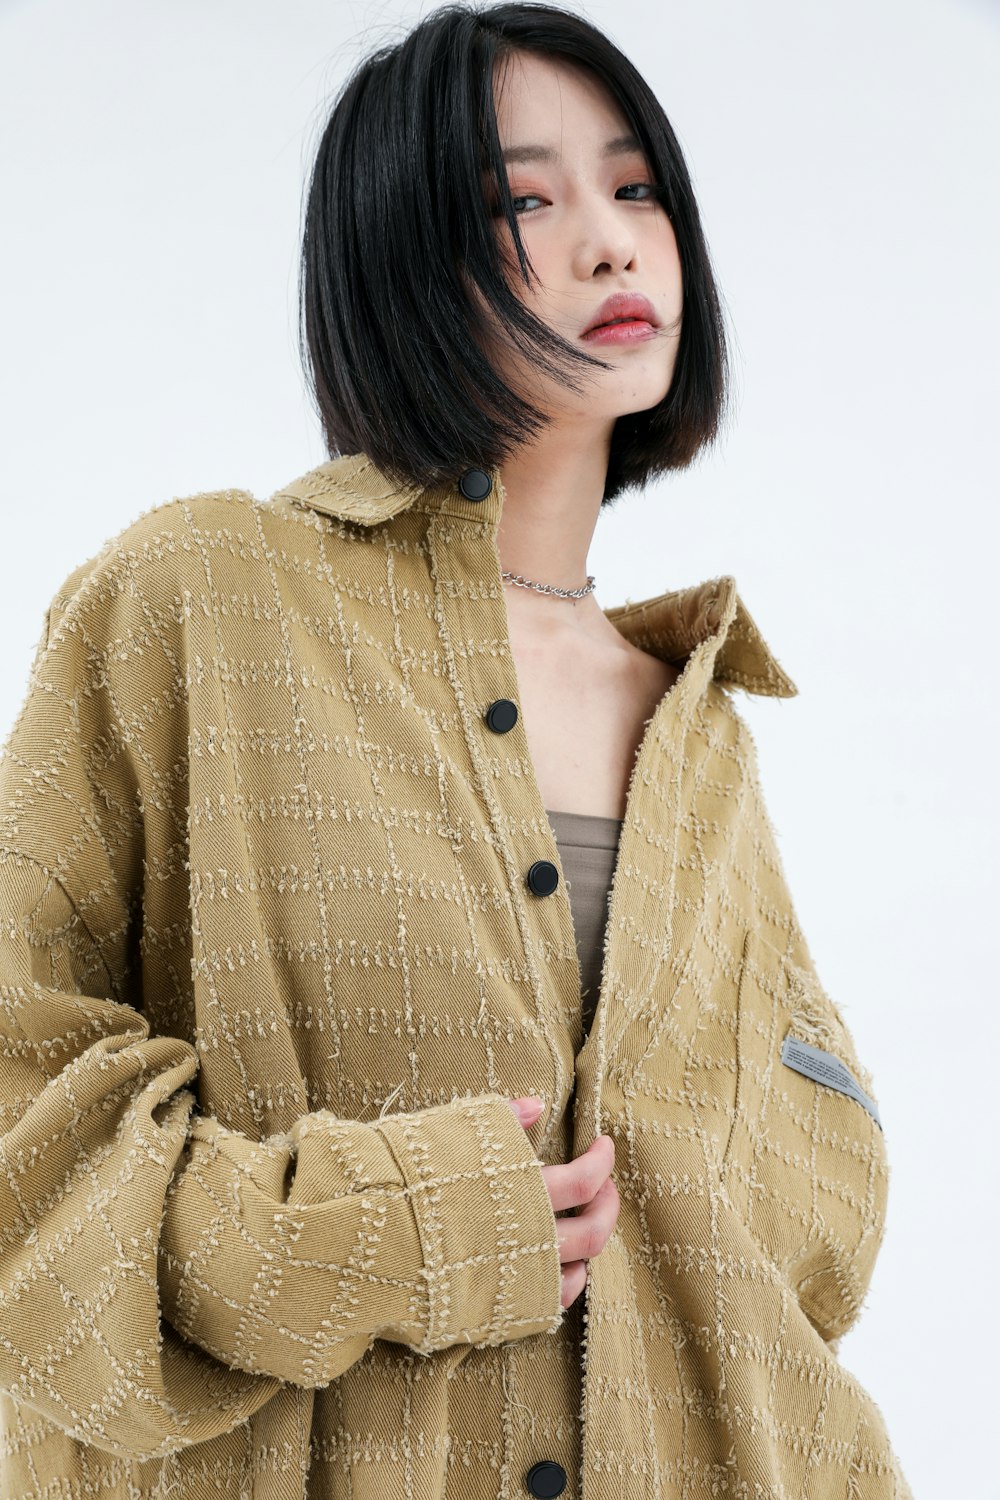 a woman with black hair wearing a brown jacket